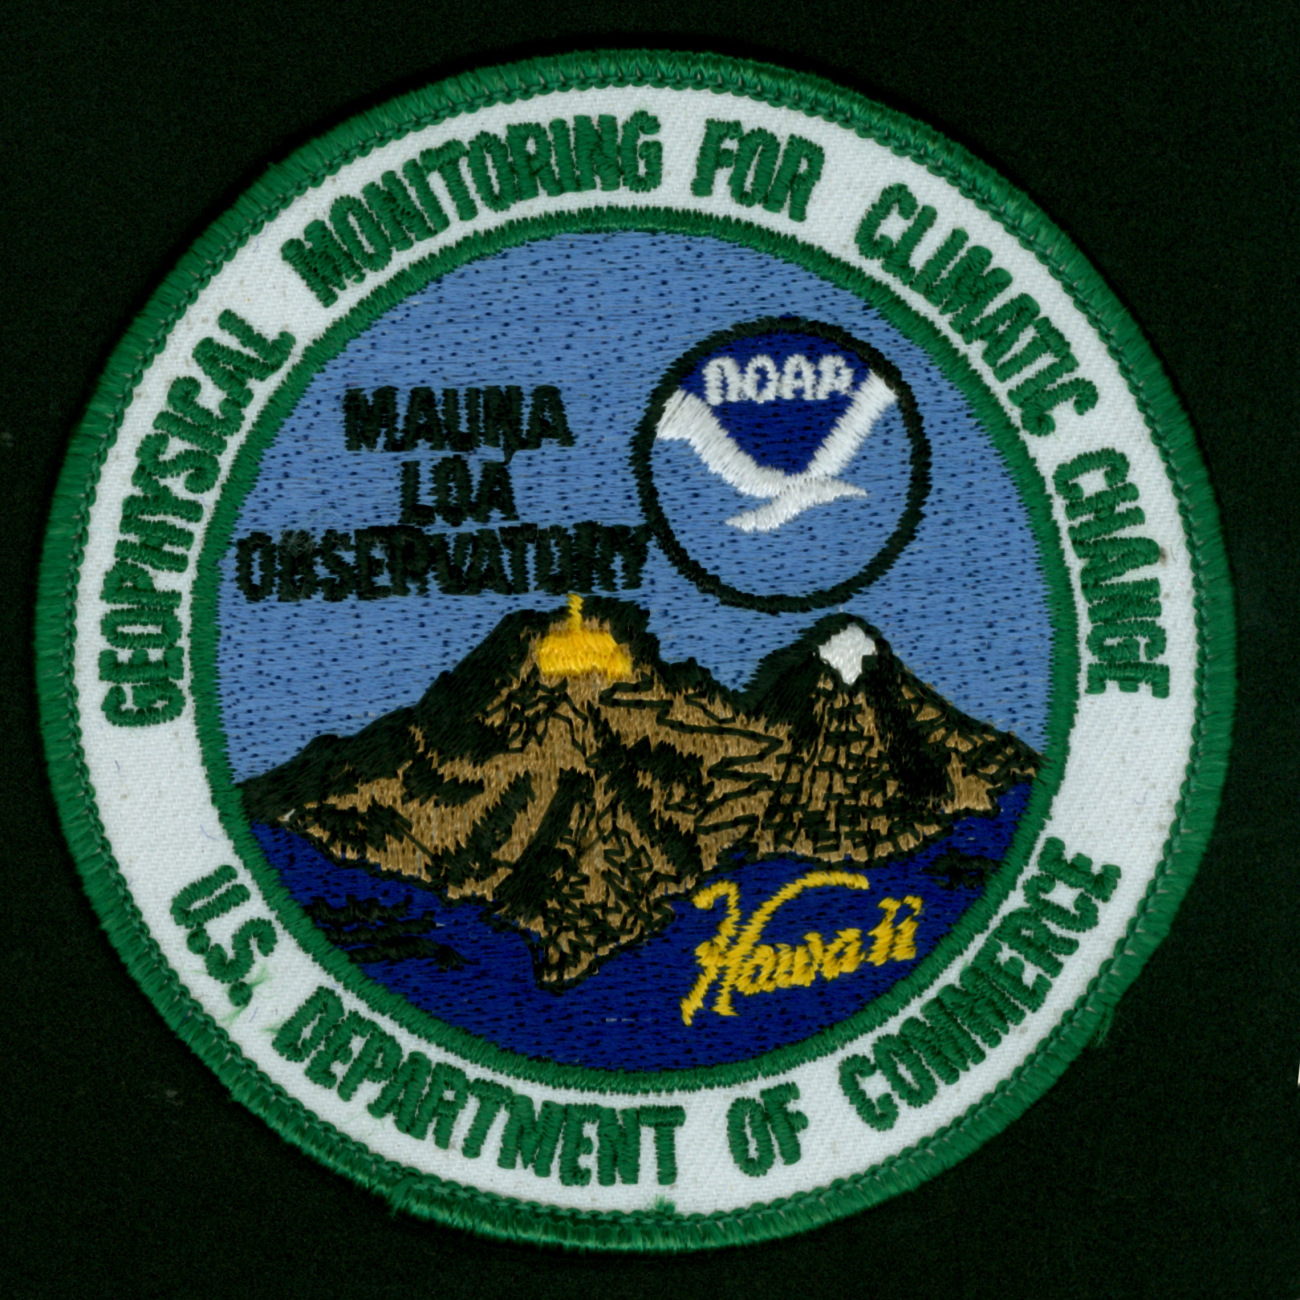 Patch commemorating the Mauna Loa Observatory of NOAA's GeophysicalMonitoring for Climatic Change Program